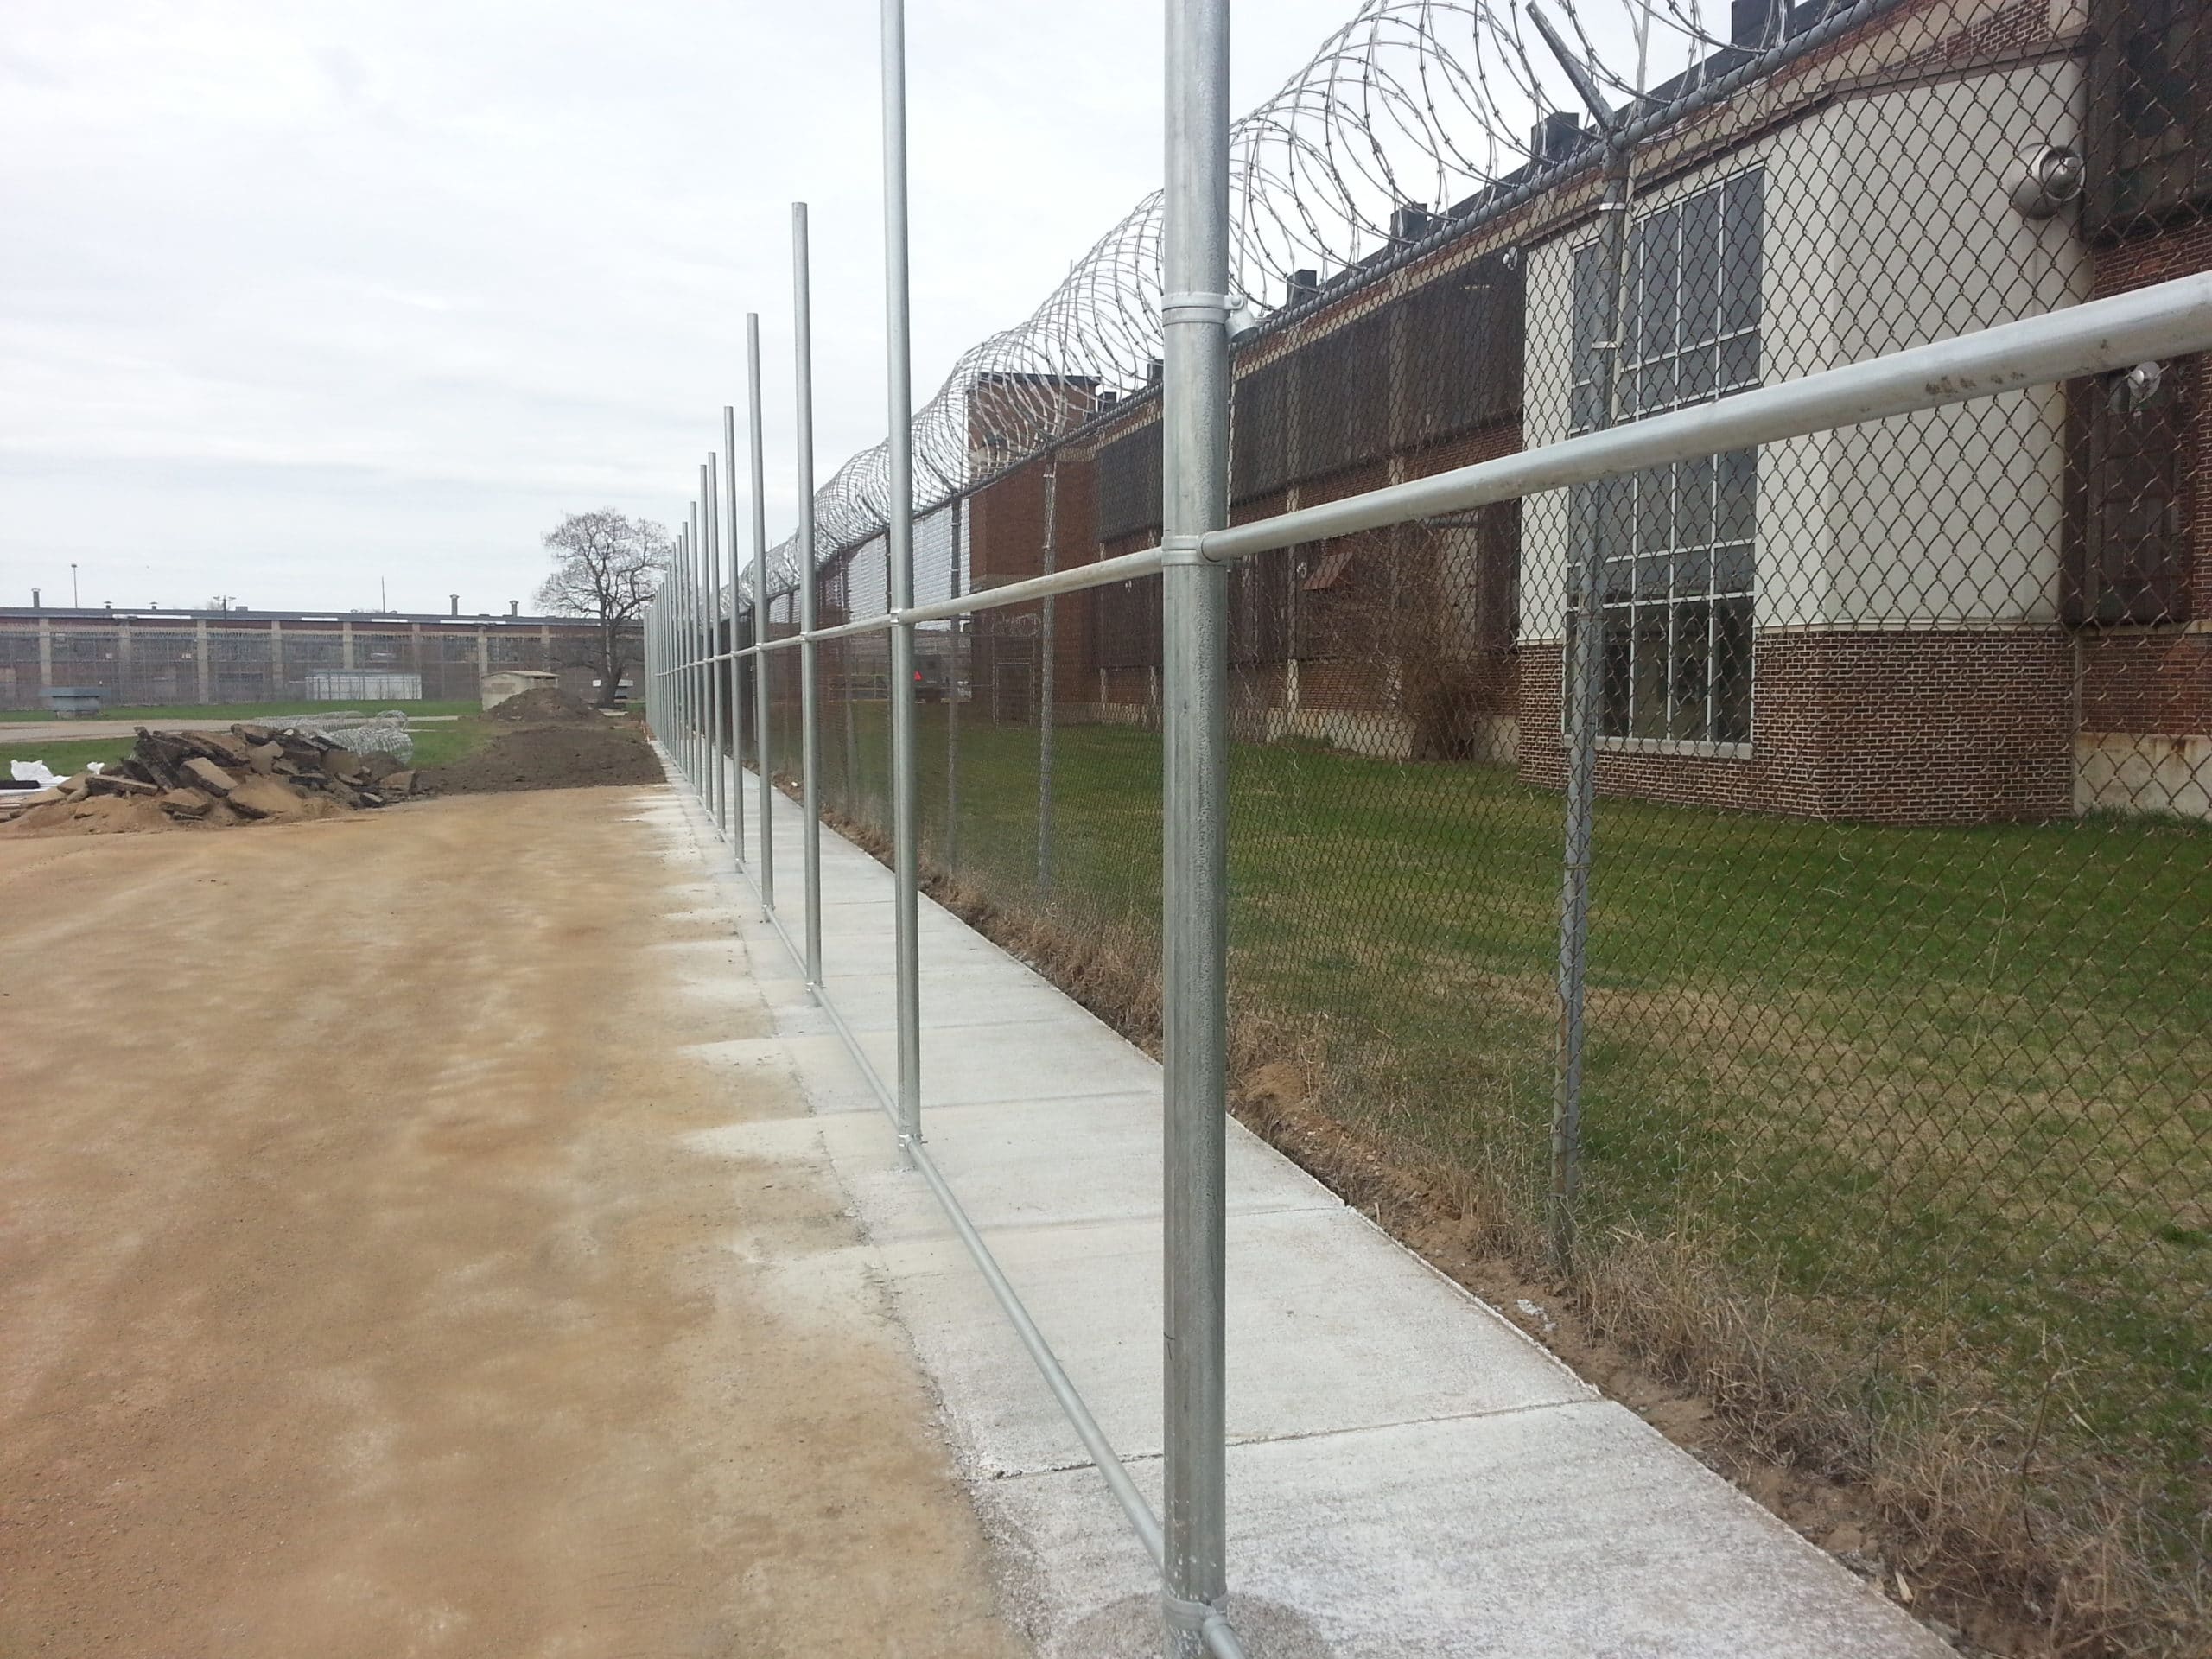 Image of razor ribbon and commercial chain link security fencing at Parnall Correctional Facility